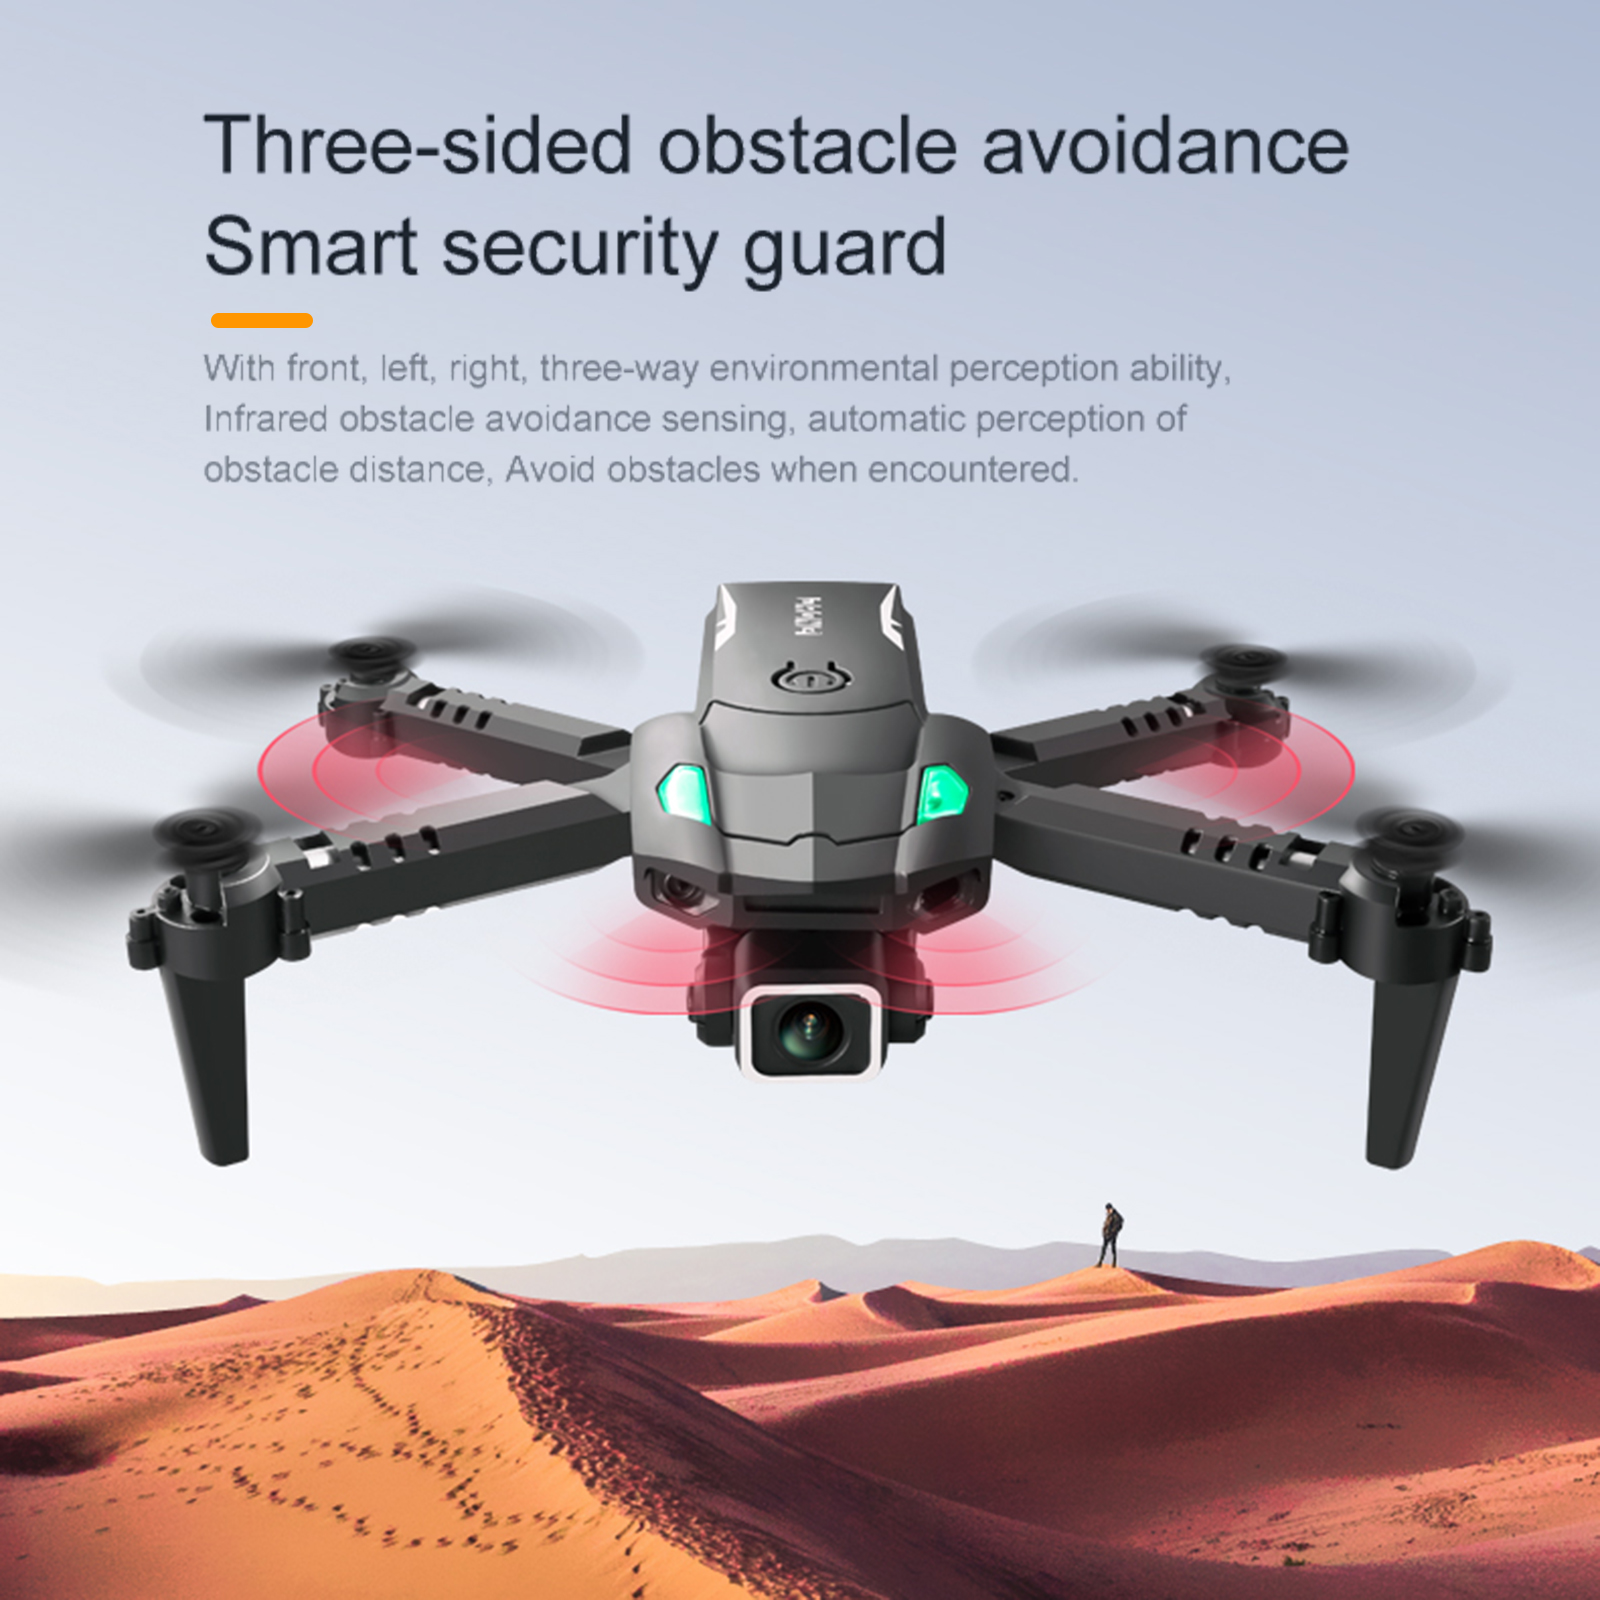 Mojoyce Smart Obstacle Avoidance Foldable Drone